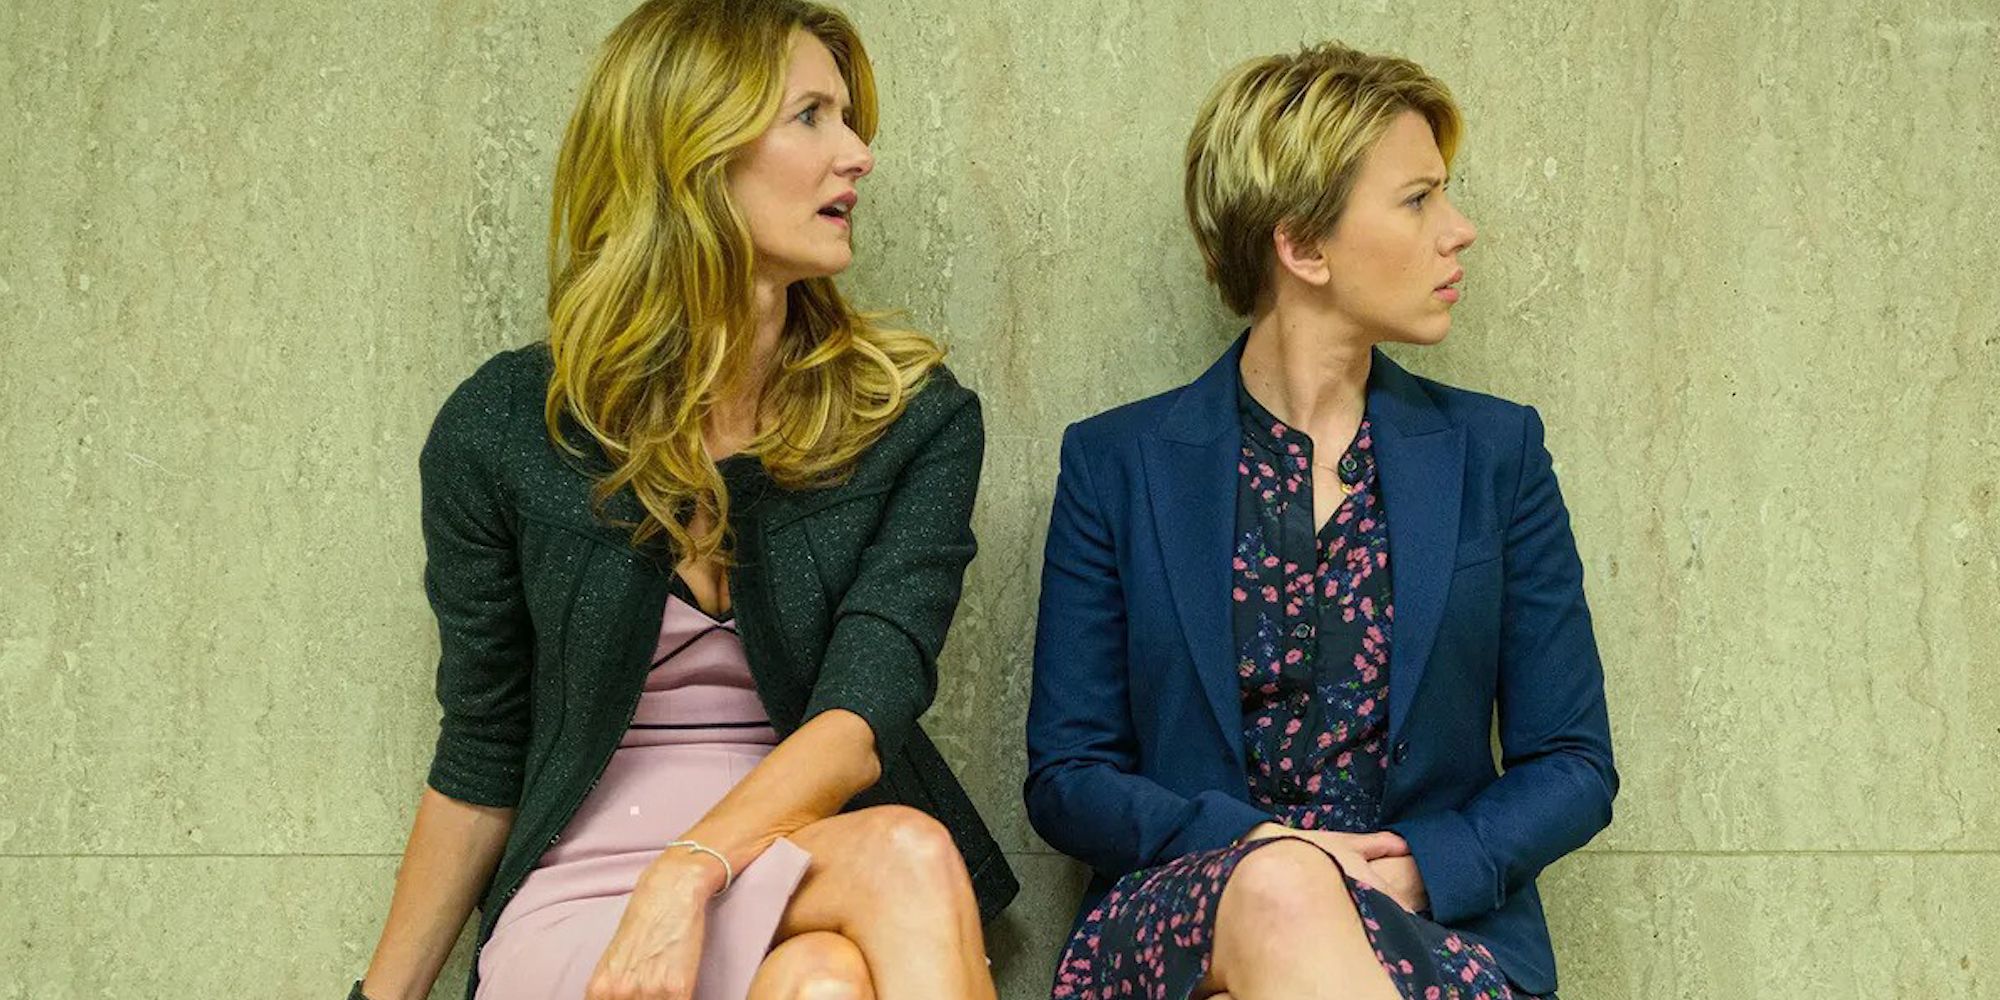 Laura Dern and Scarlett Johansson in Marriage Story looking to their left while sitting next to each other.